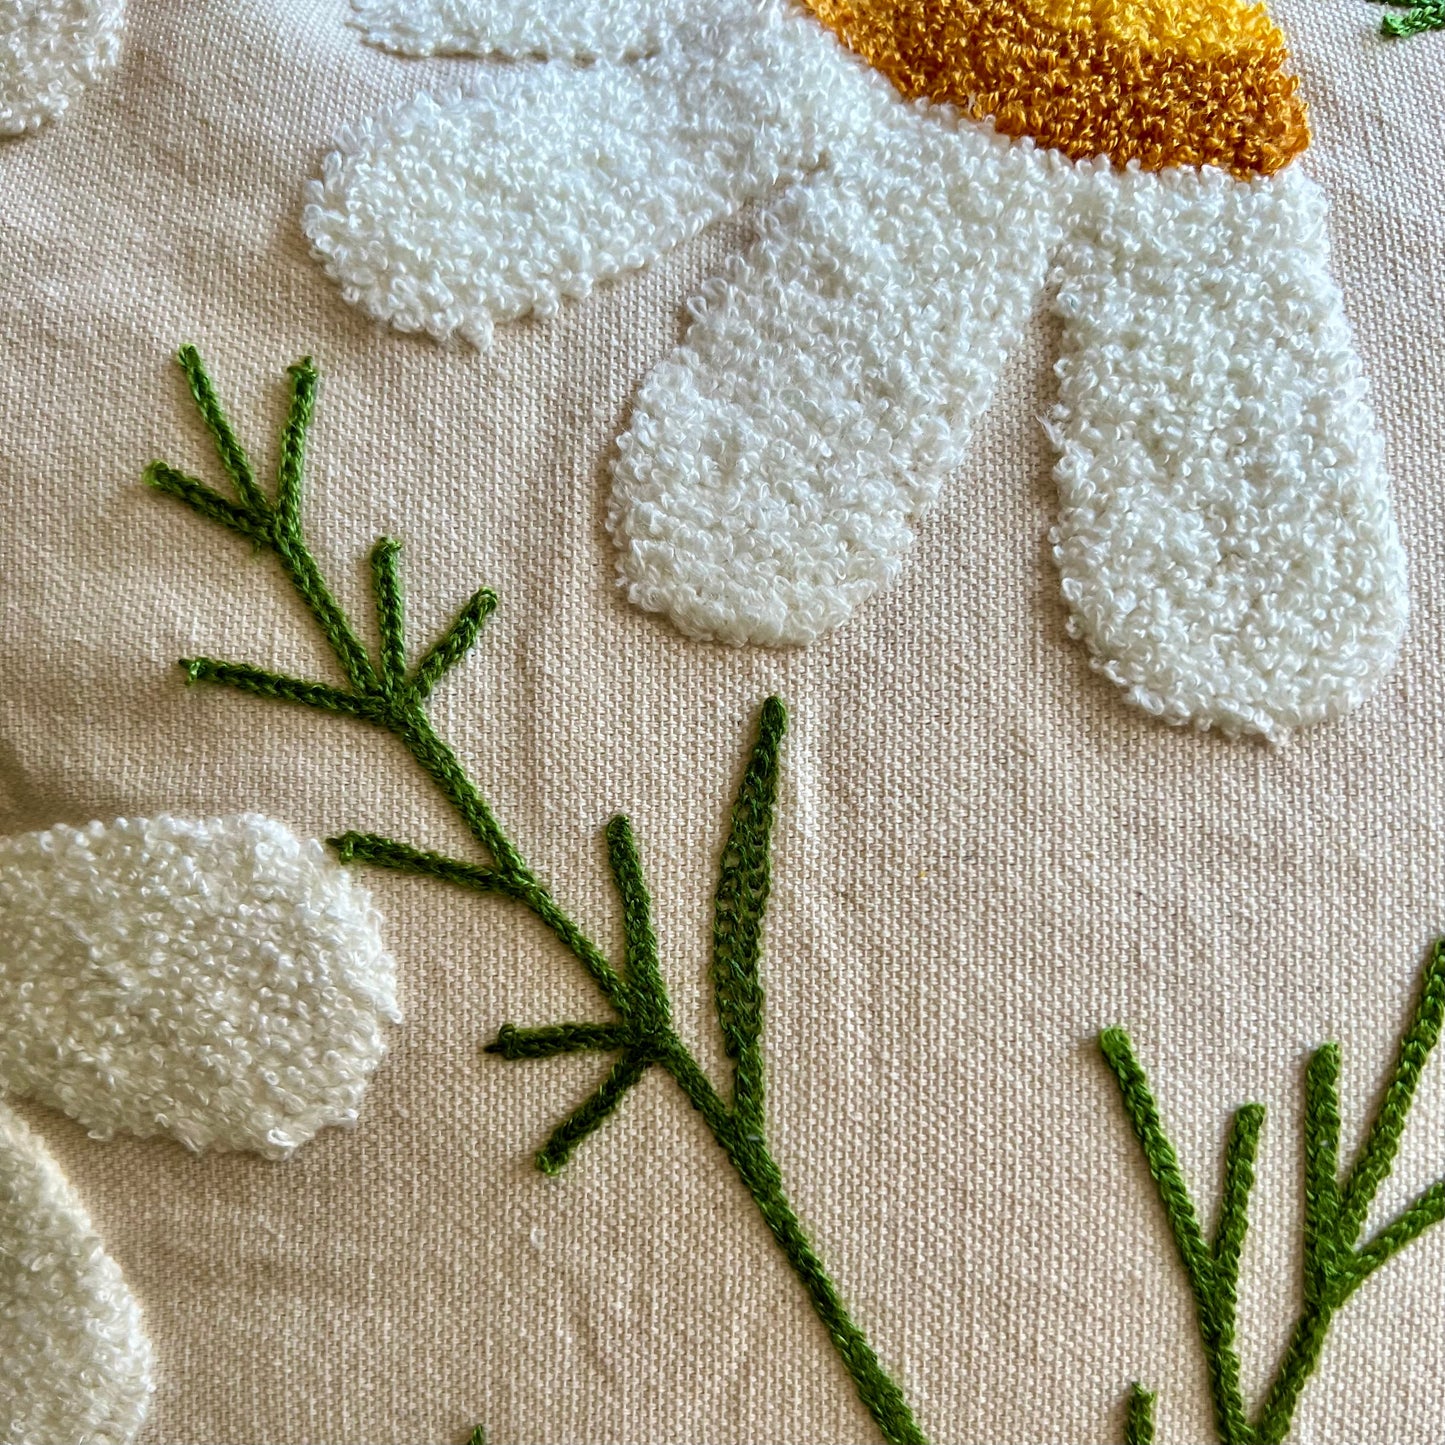 Daisy Embroidered Throw Pillow Cover